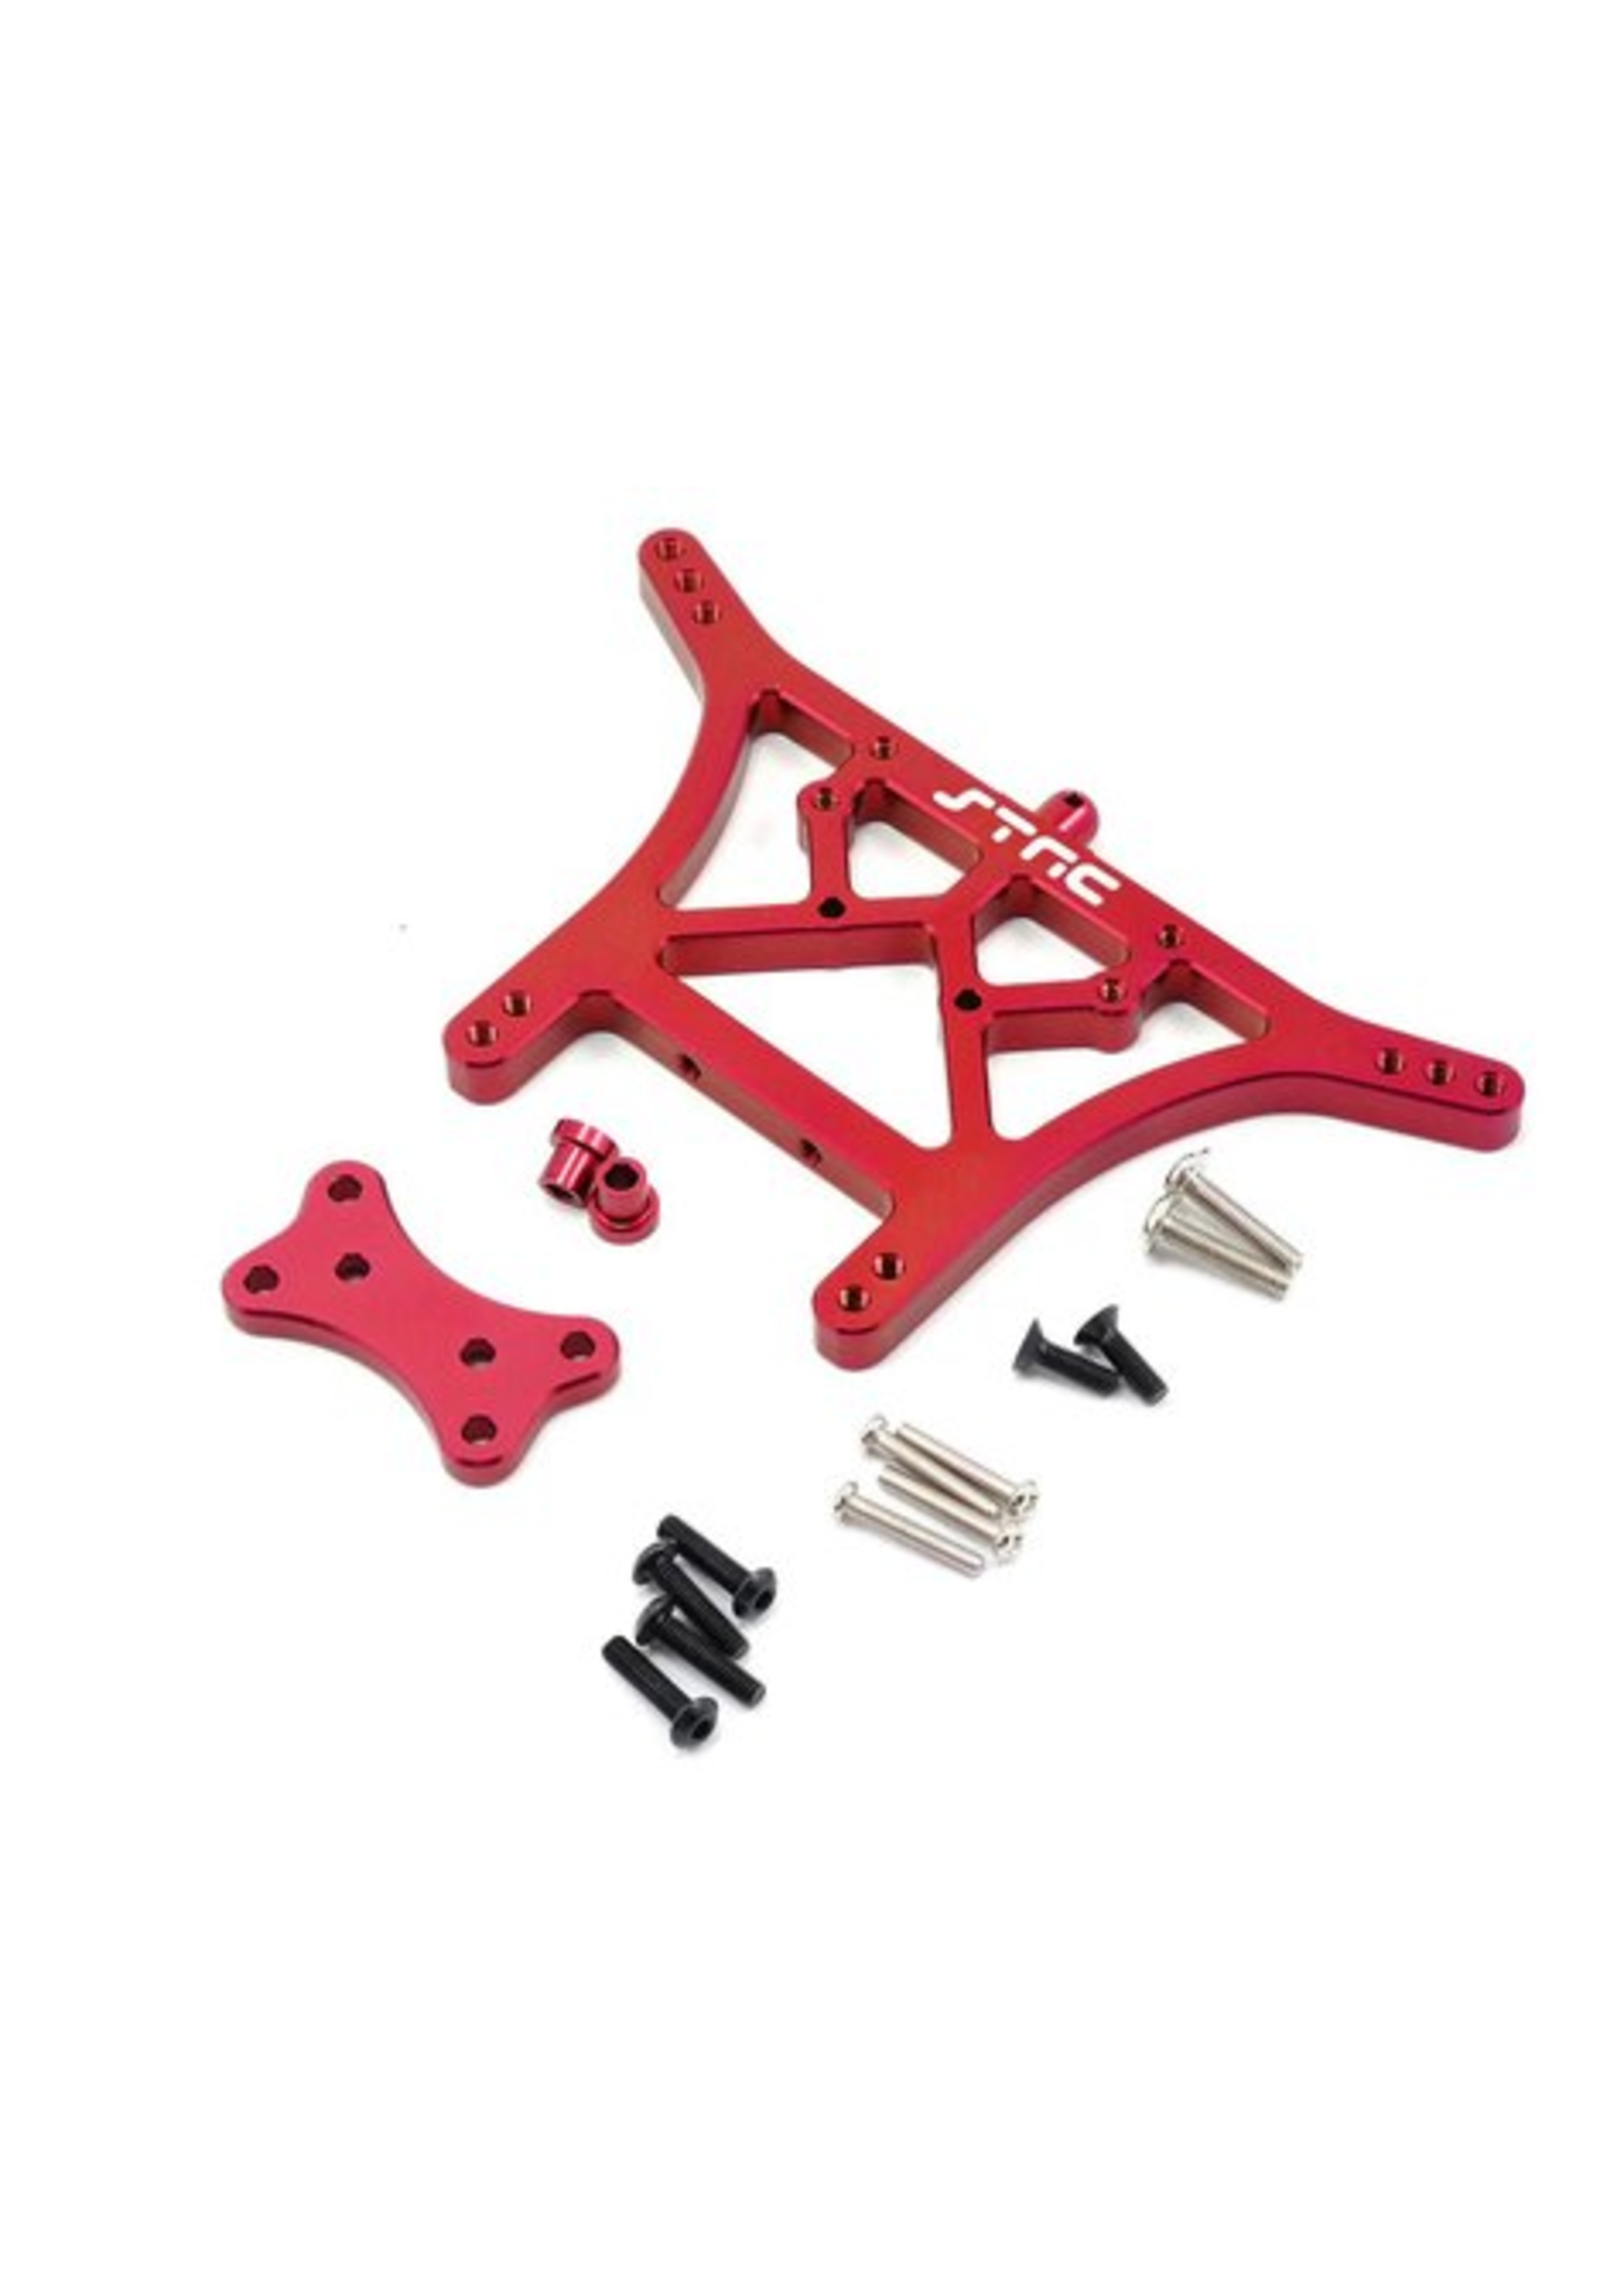 ST Racing Concepts SPTST3638R ST Racing Concepts Aluminum 6mm Heavy Duty Rear Shock Tower for Traxxas Stampede/Rustler/Bandit/Slash (Red)